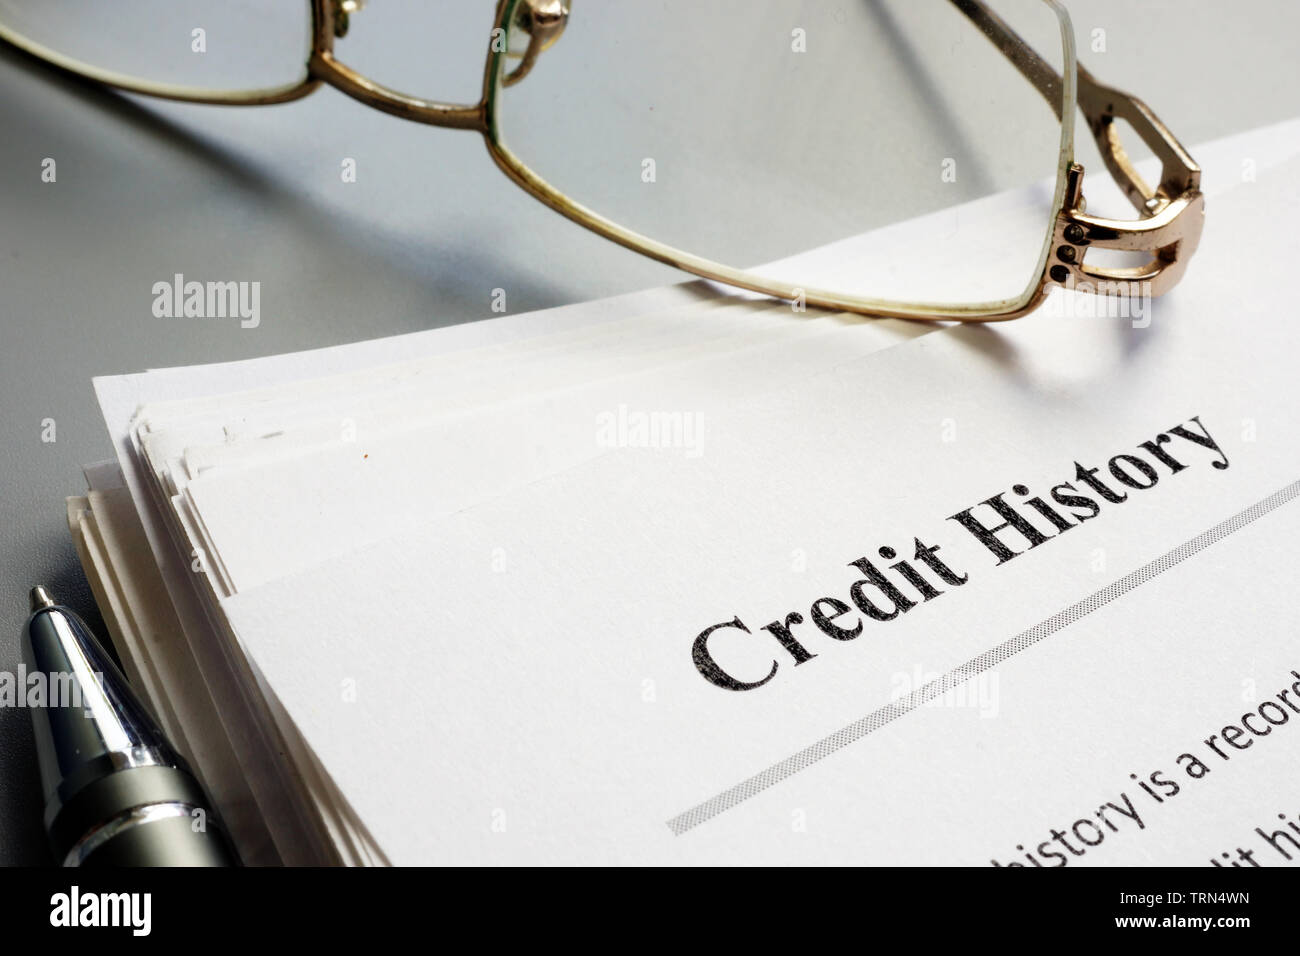 Credit history report papers and pen. Stock Photo